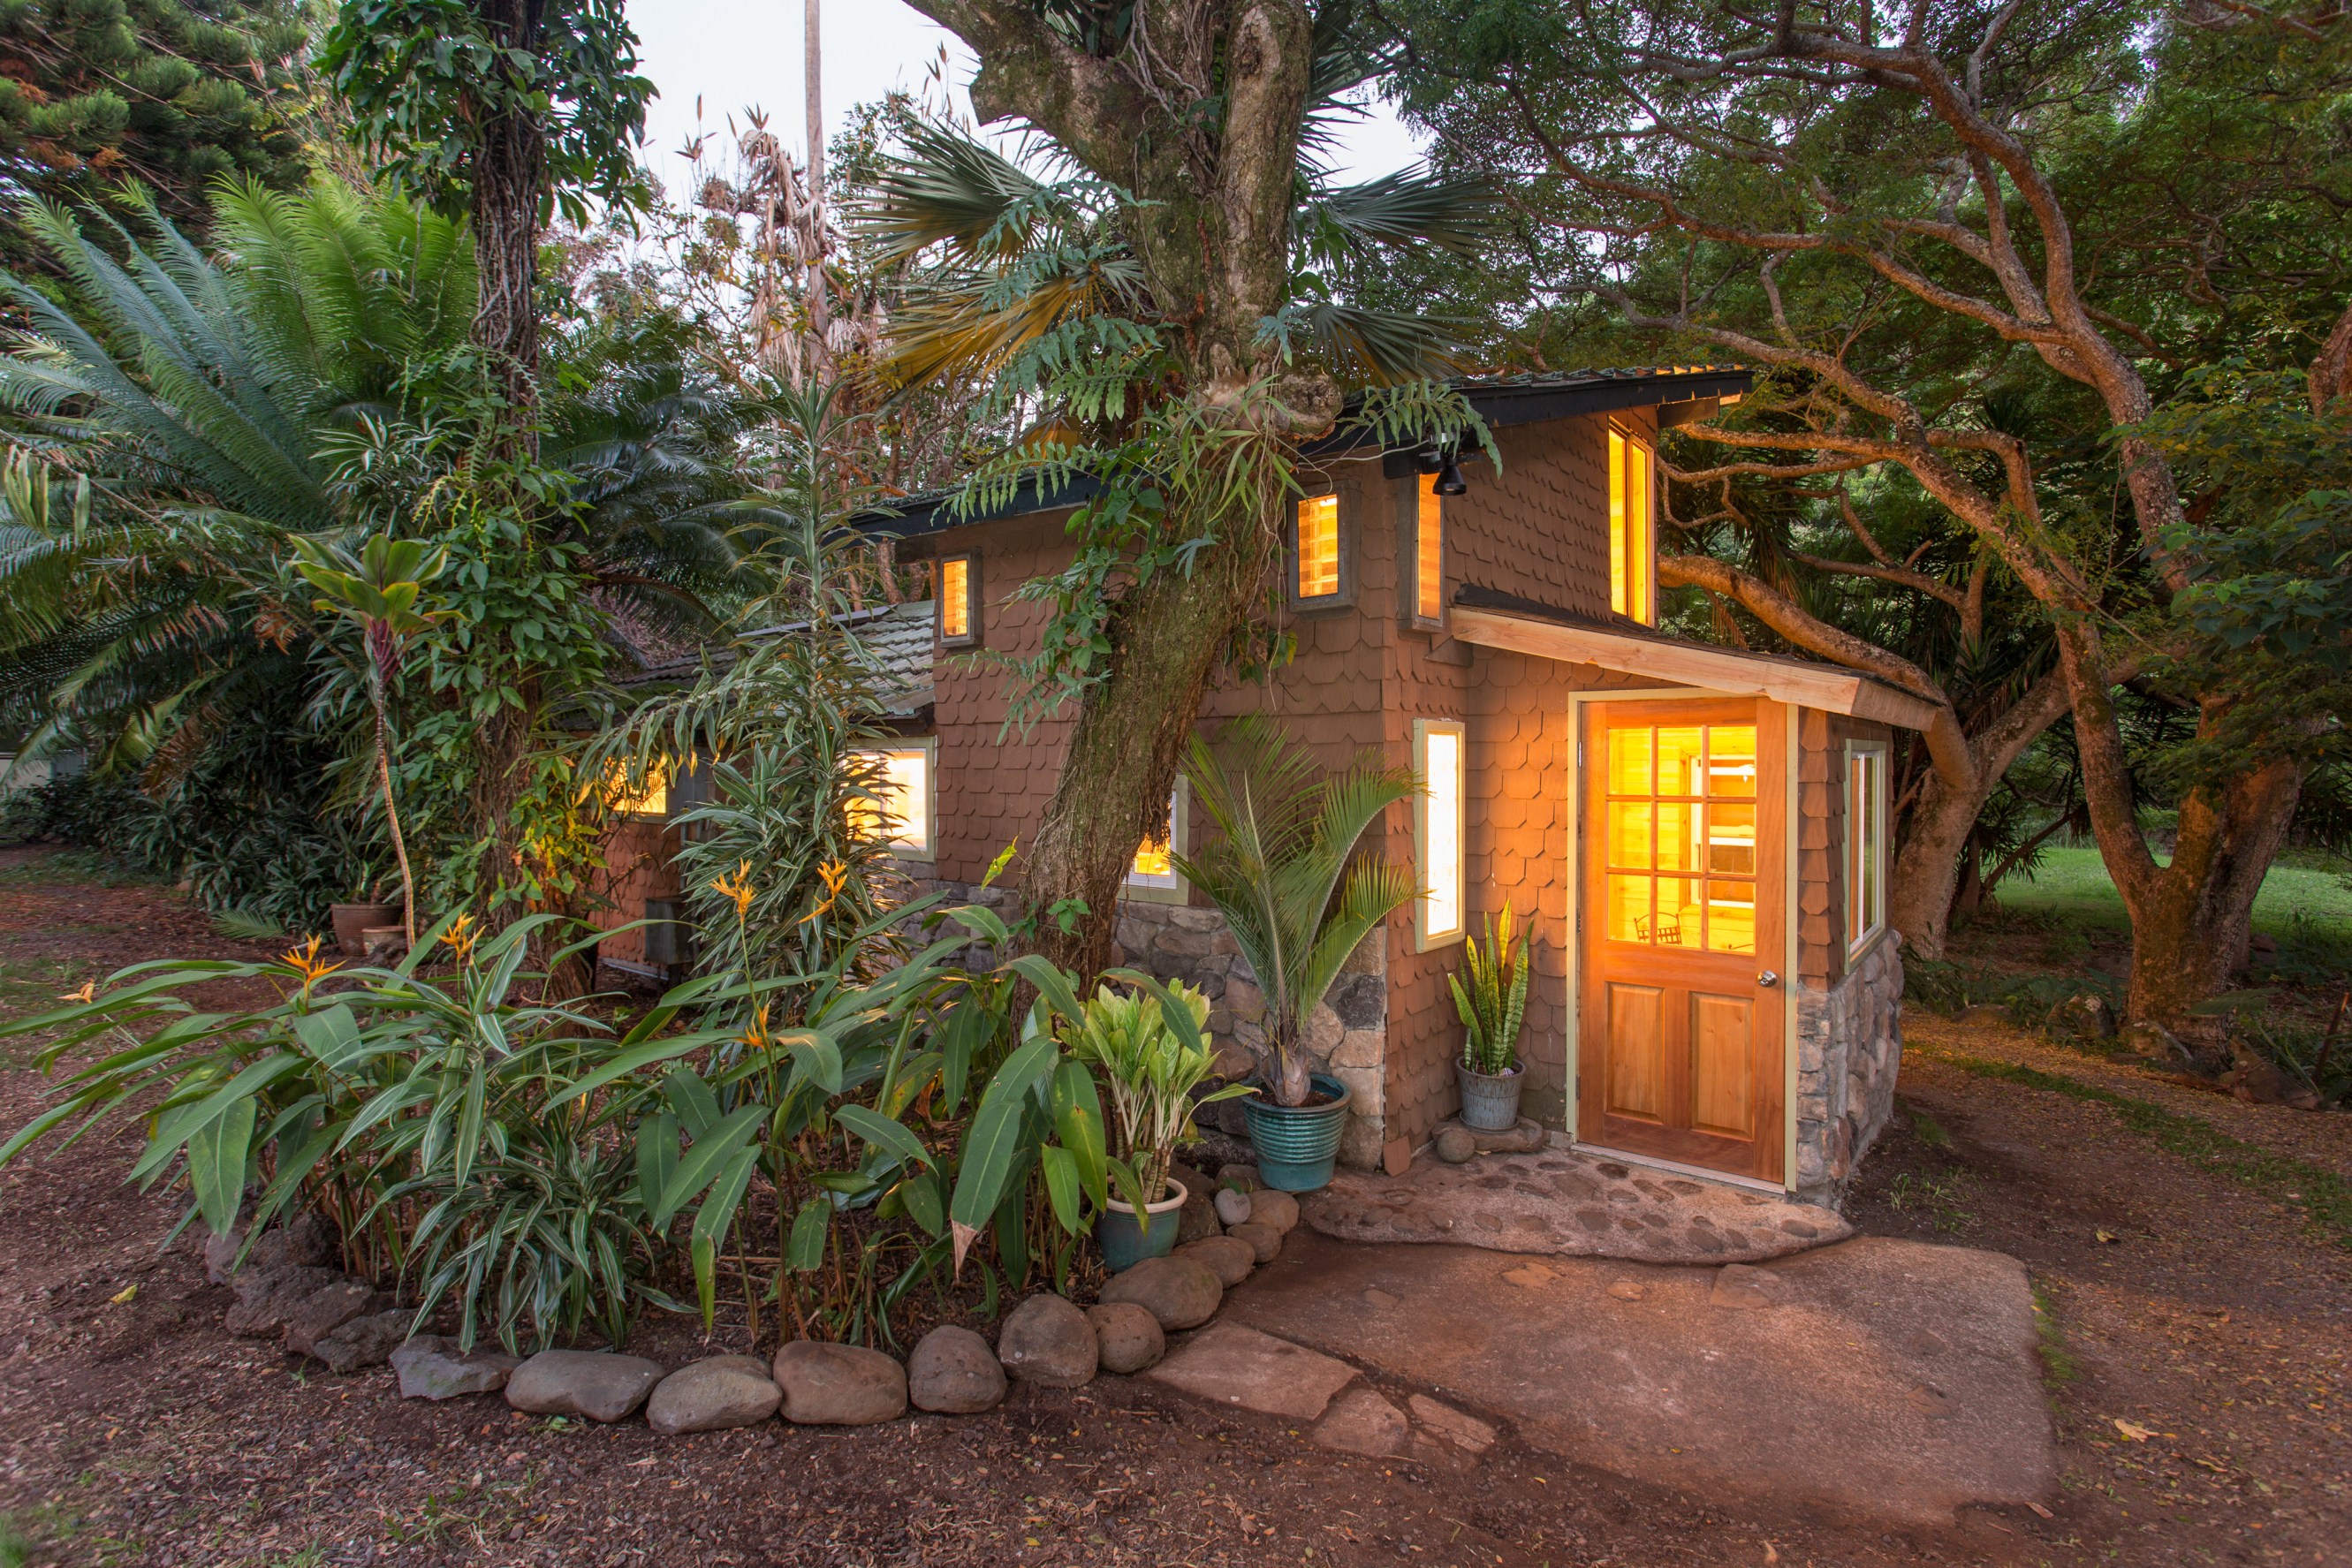 Warmly-lit cabin, surrounded by tropical trees with a path leading straight to the door